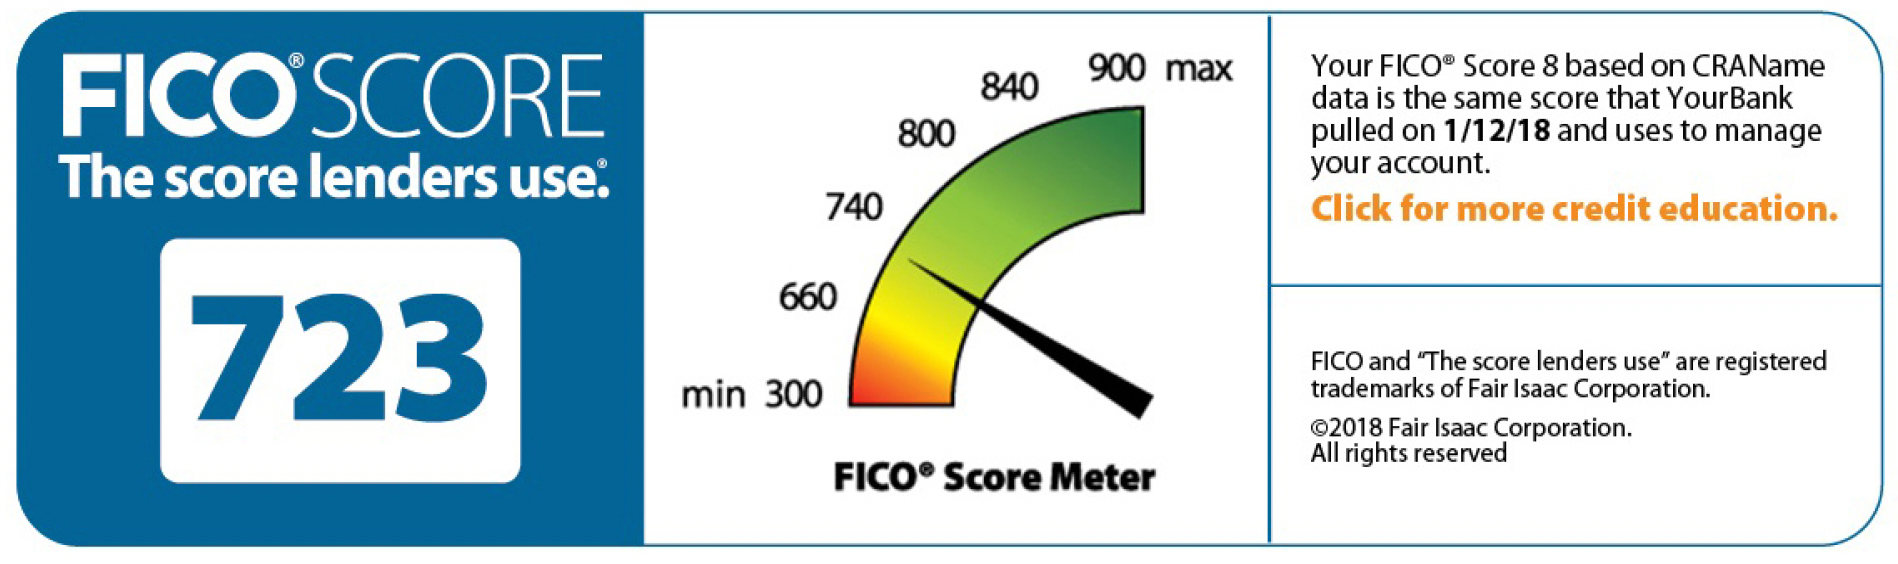 Open Access program lets customers get free FICO scores